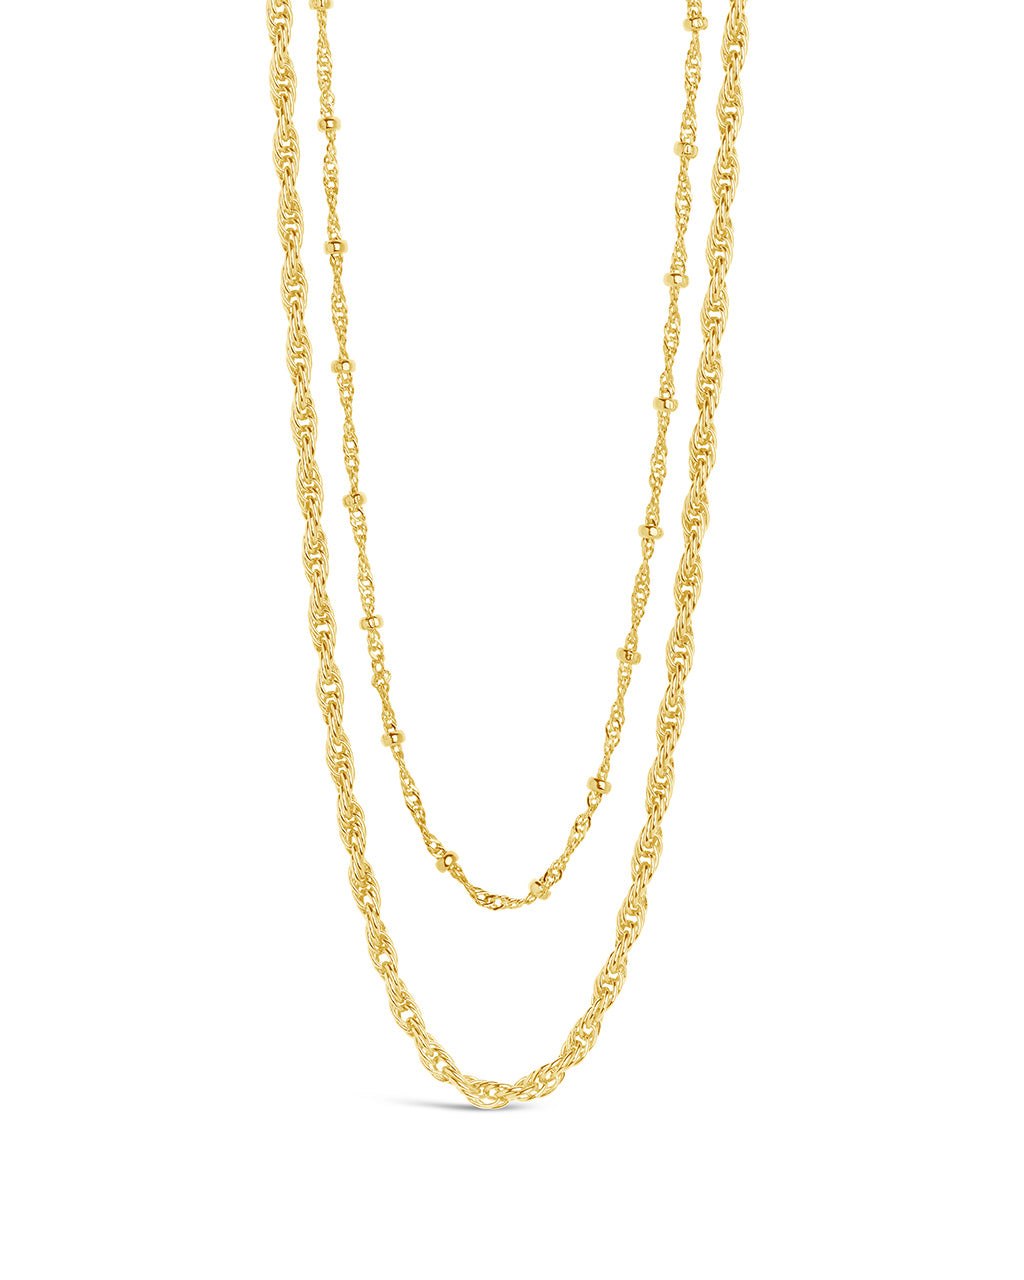 Raya Layered Chain Necklace Necklace Sterling Forever 